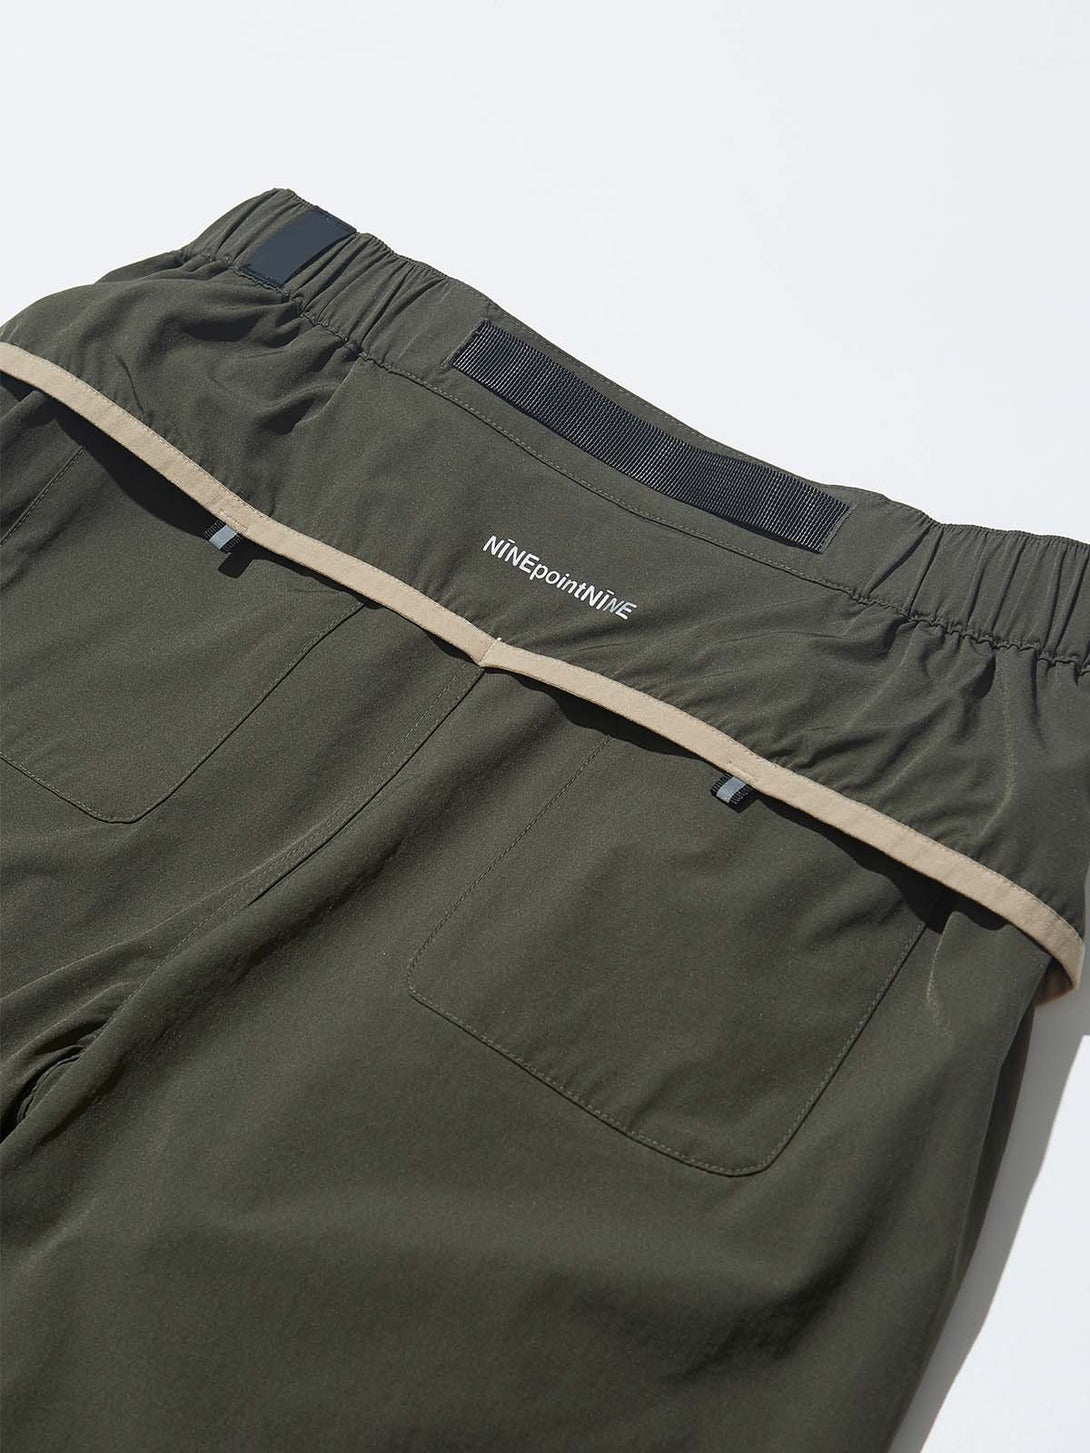 Division Functional Running Shorts - NINEPointNINE